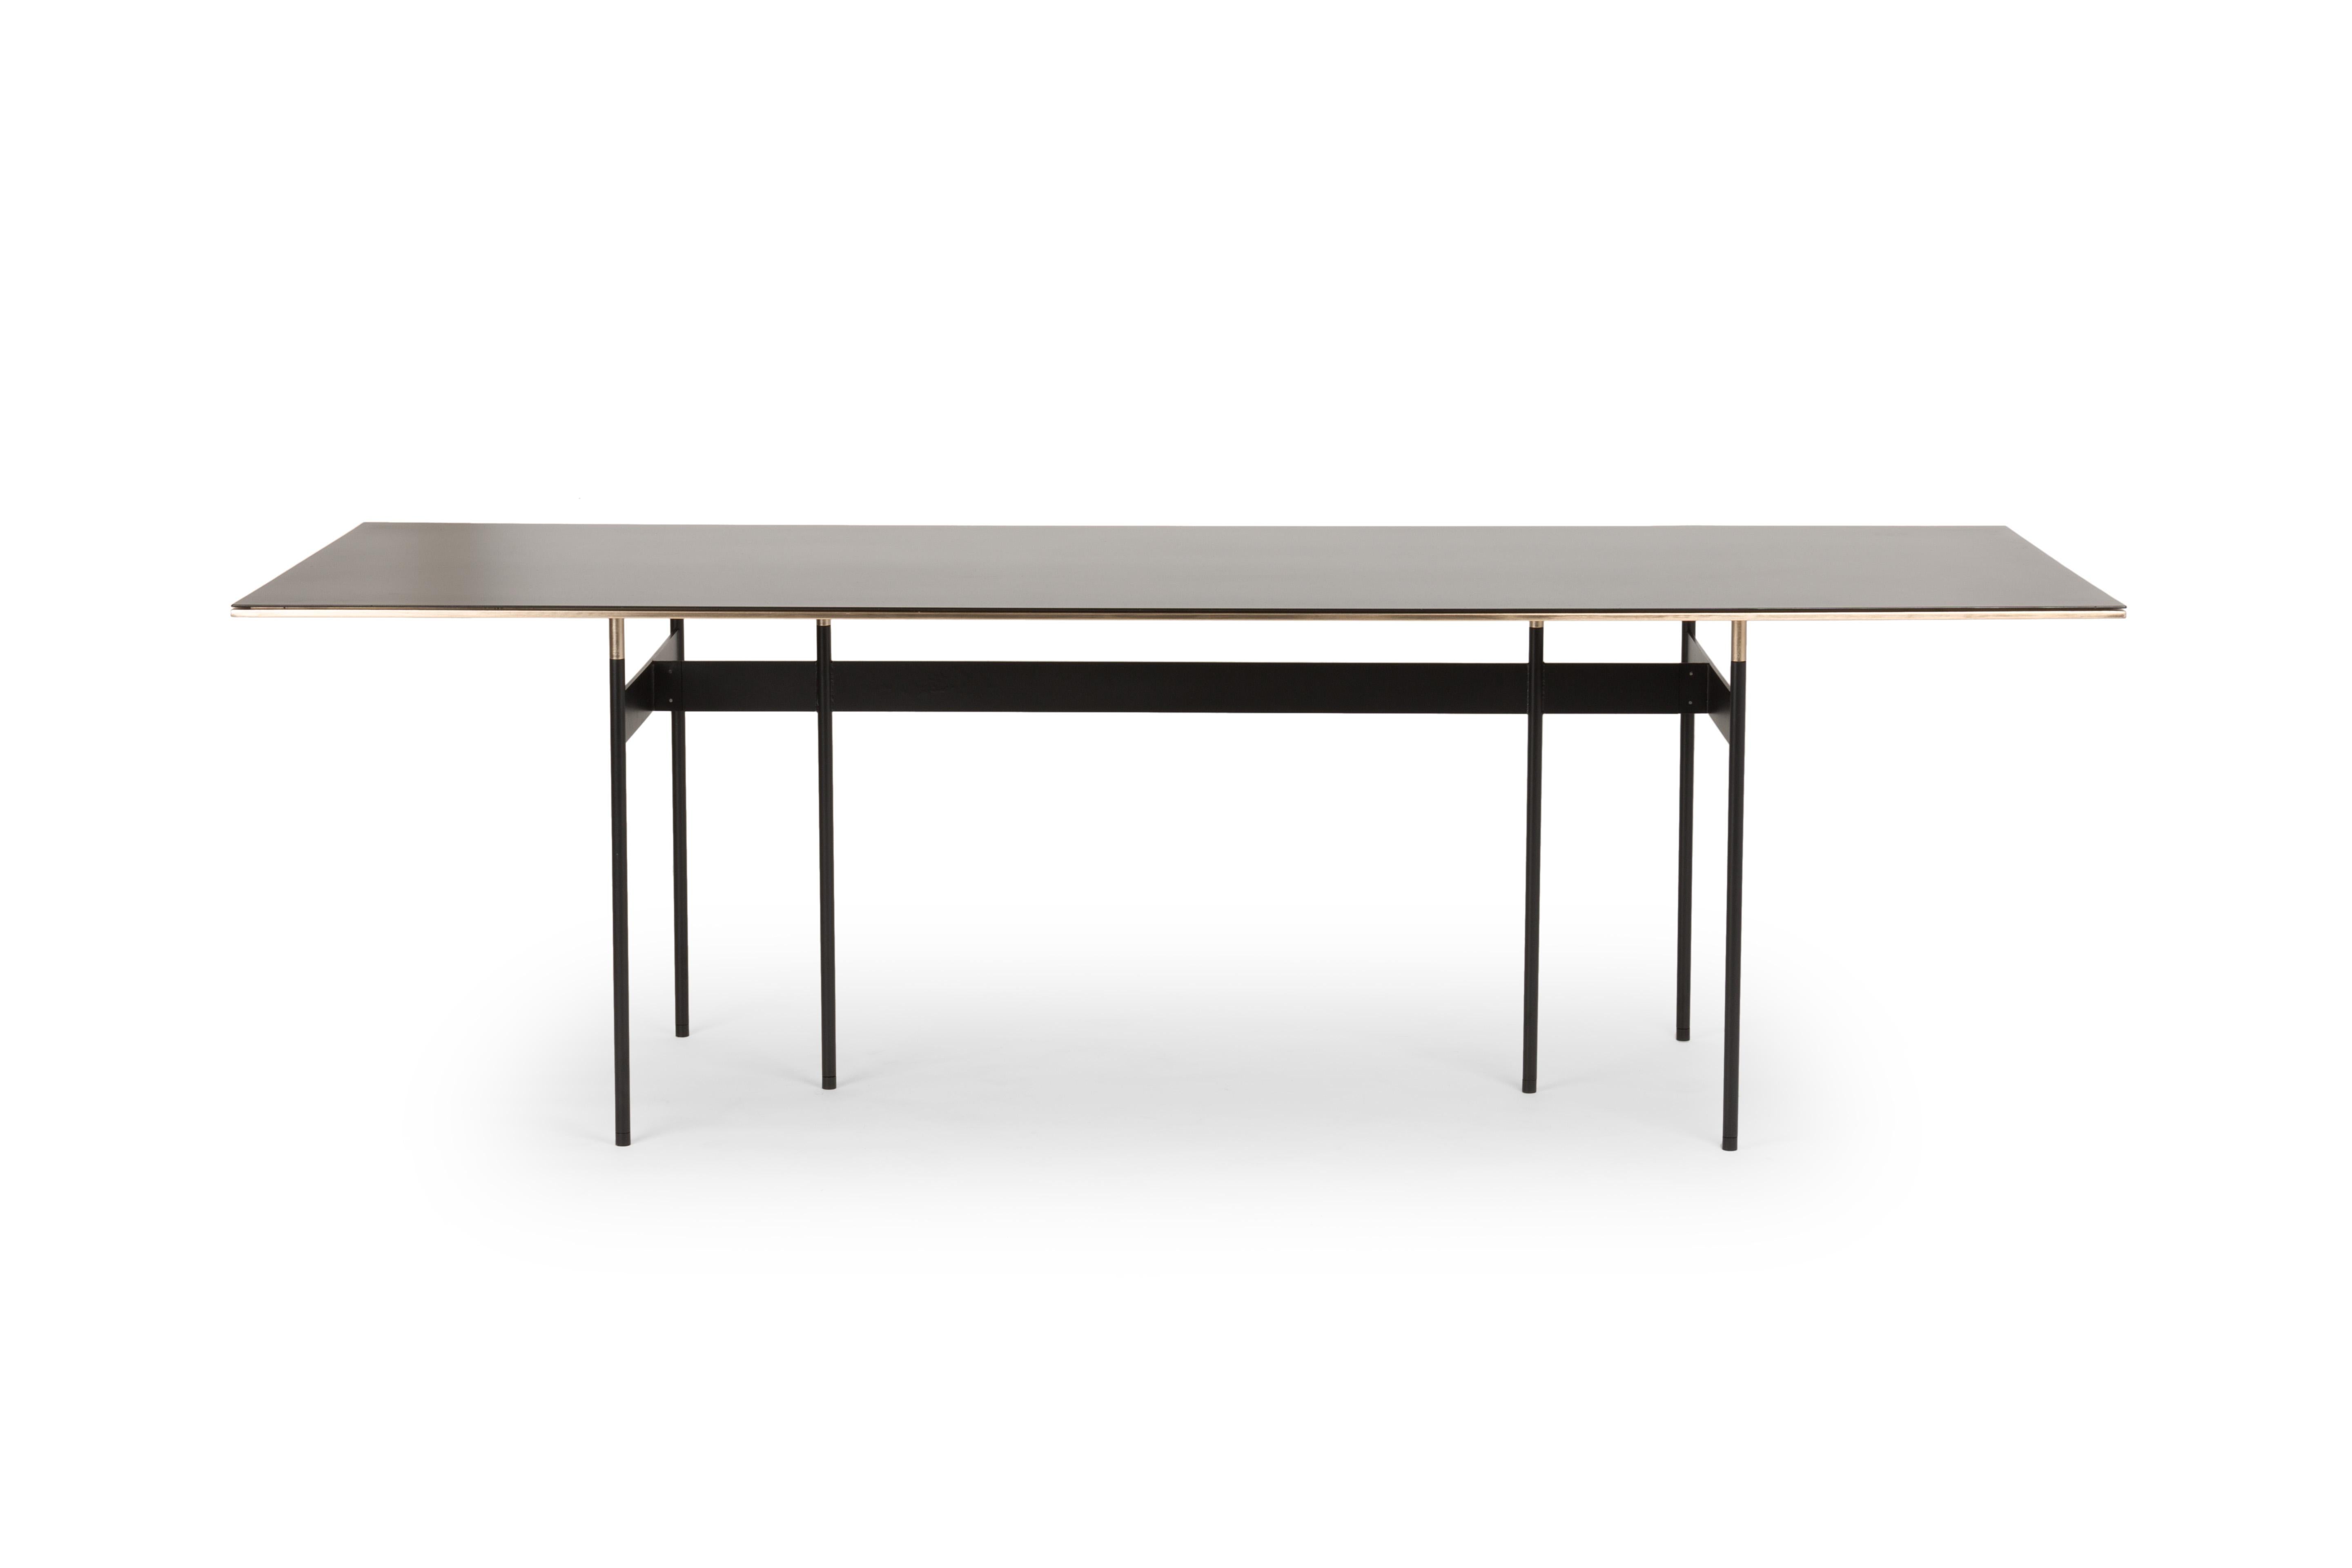 Tartan table by Mingardo
Dimensions: D240 x W90 x H72 cm 
Materials: Varnished black iron with brassed details
Weight: 80 kg

Also Available in different finishes.

Horizontal and vertical lines cross, touch and overlap each other; this is